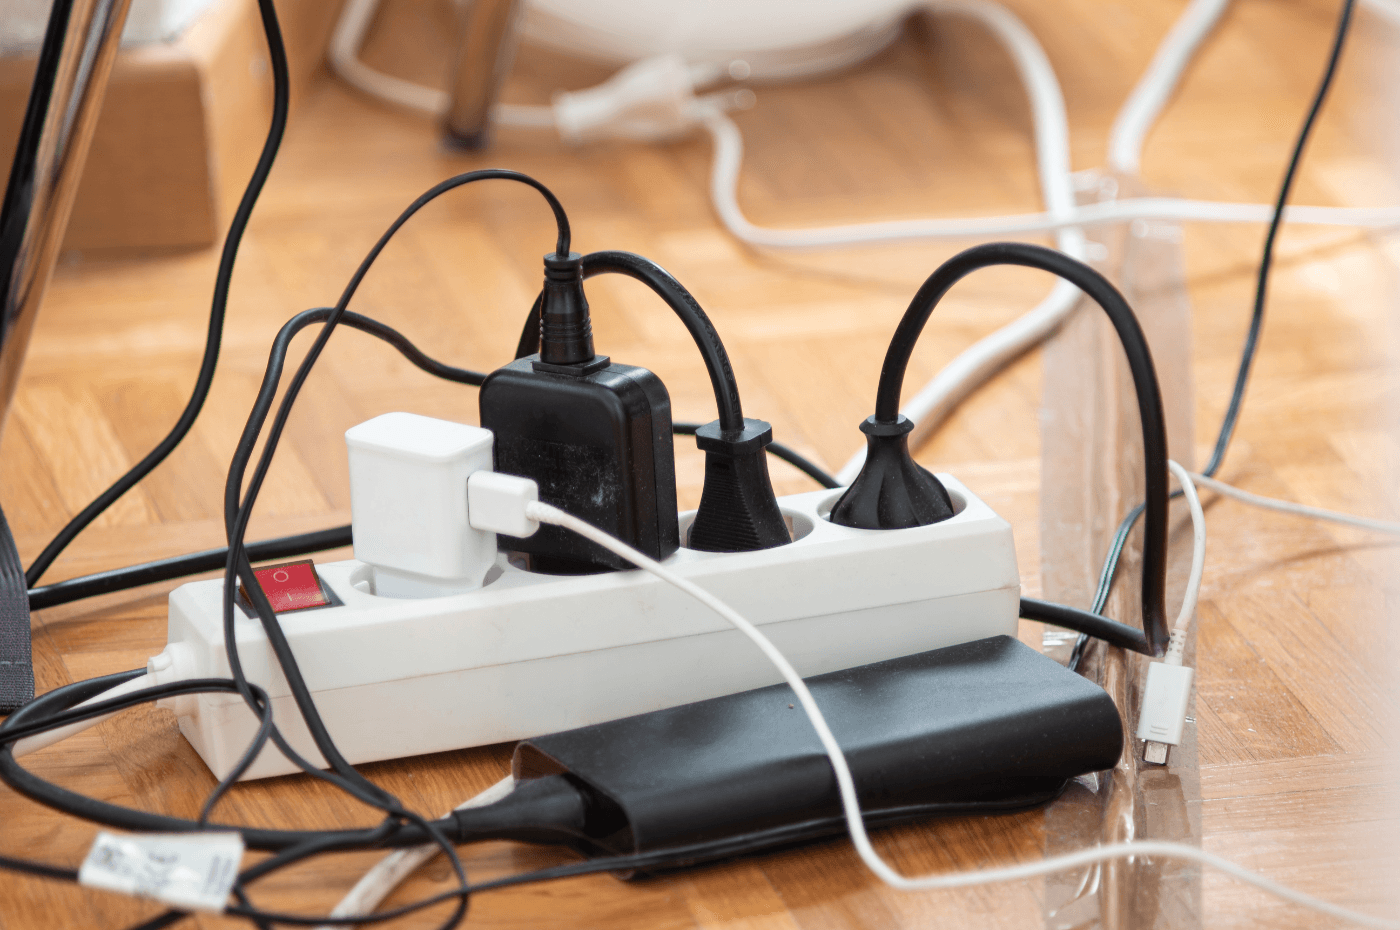 7 tips on how to hide electrical wires around the house